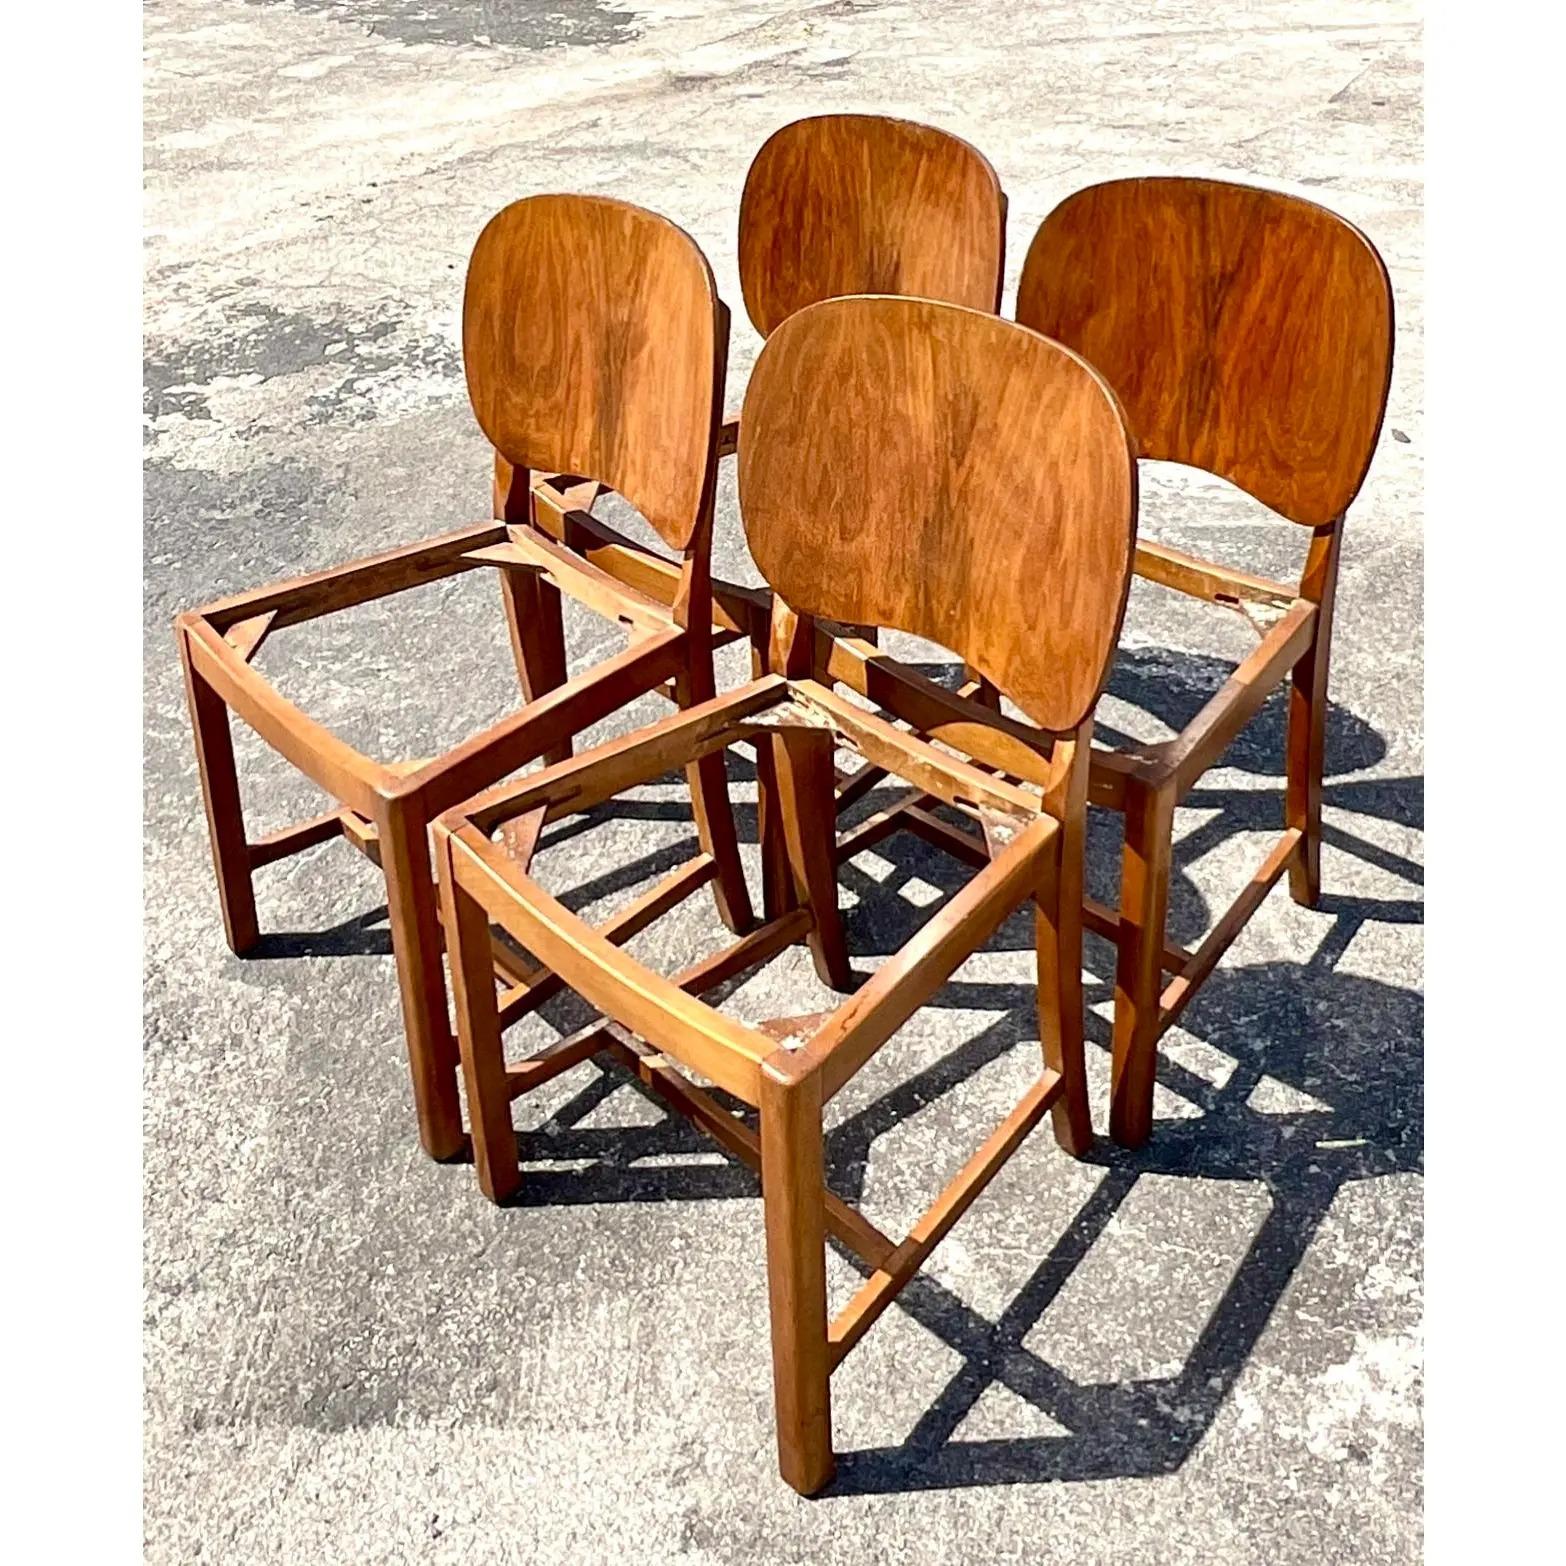 North American Vintage Deco Burl Wood Paddle Back Dining Chairs, Set of Four